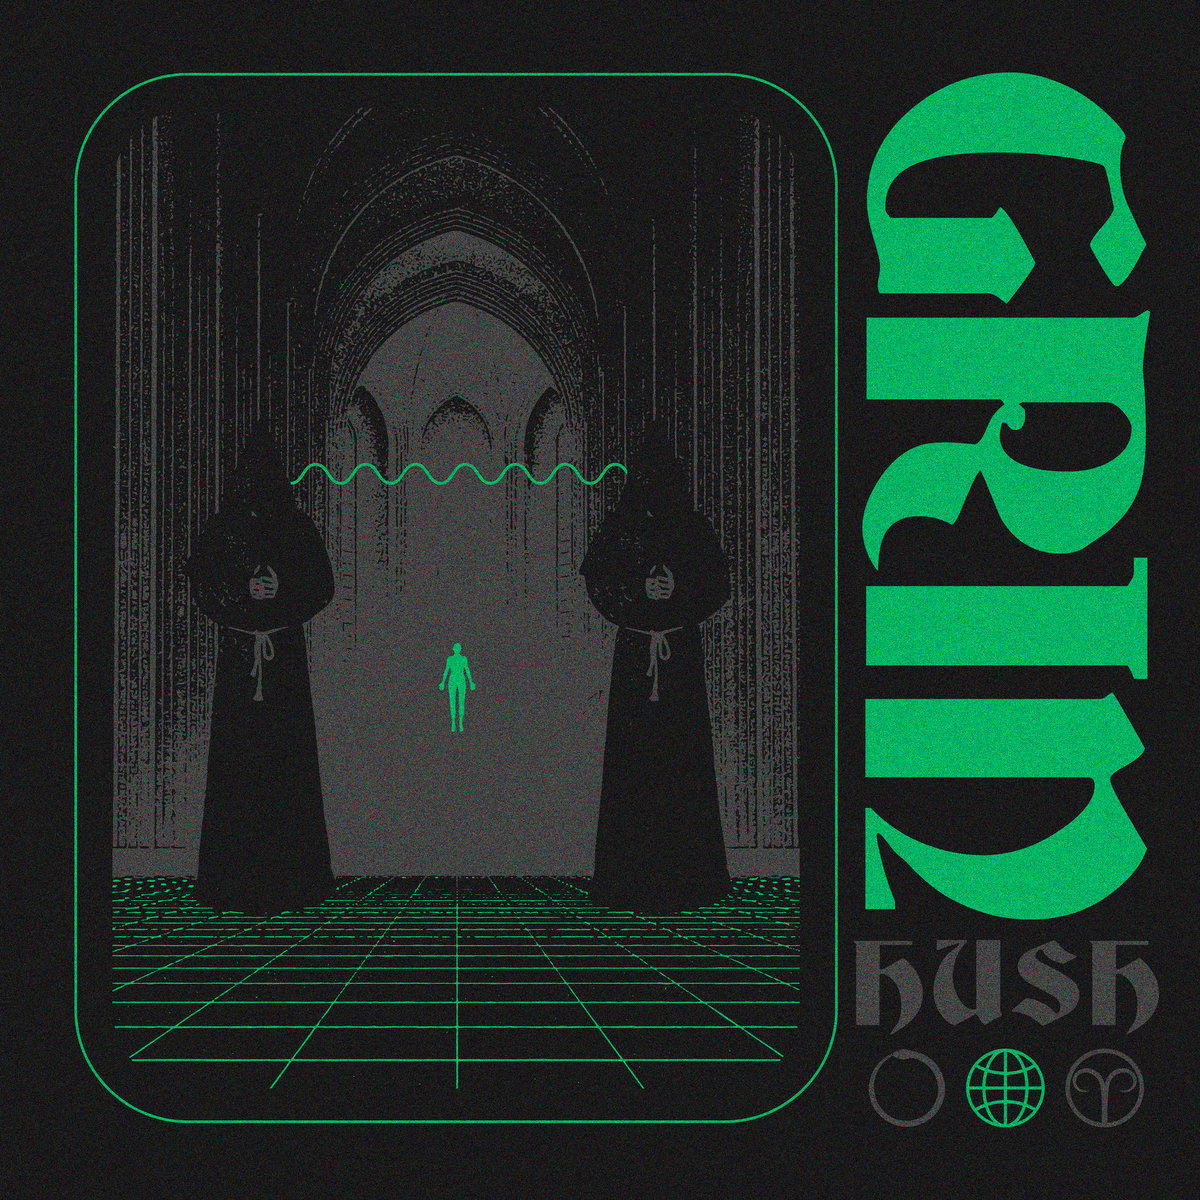 Hush by Grin